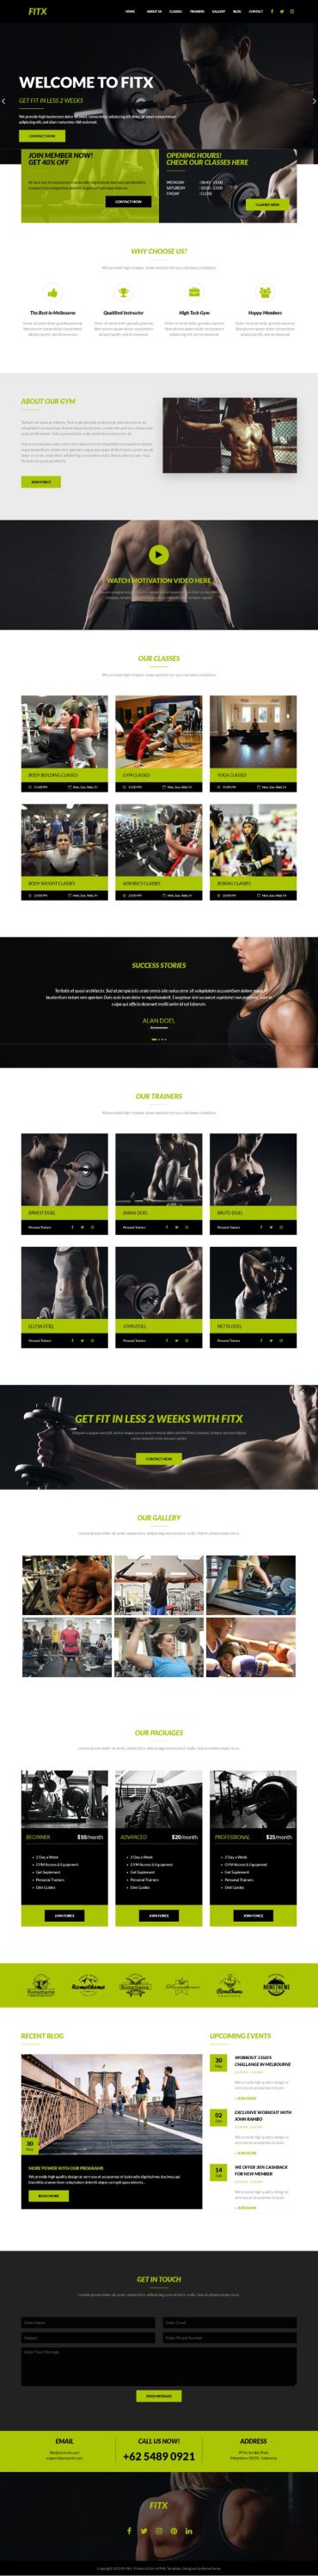 Mẫu website dịch vụ phòng tập gym - Fitness and gym 3